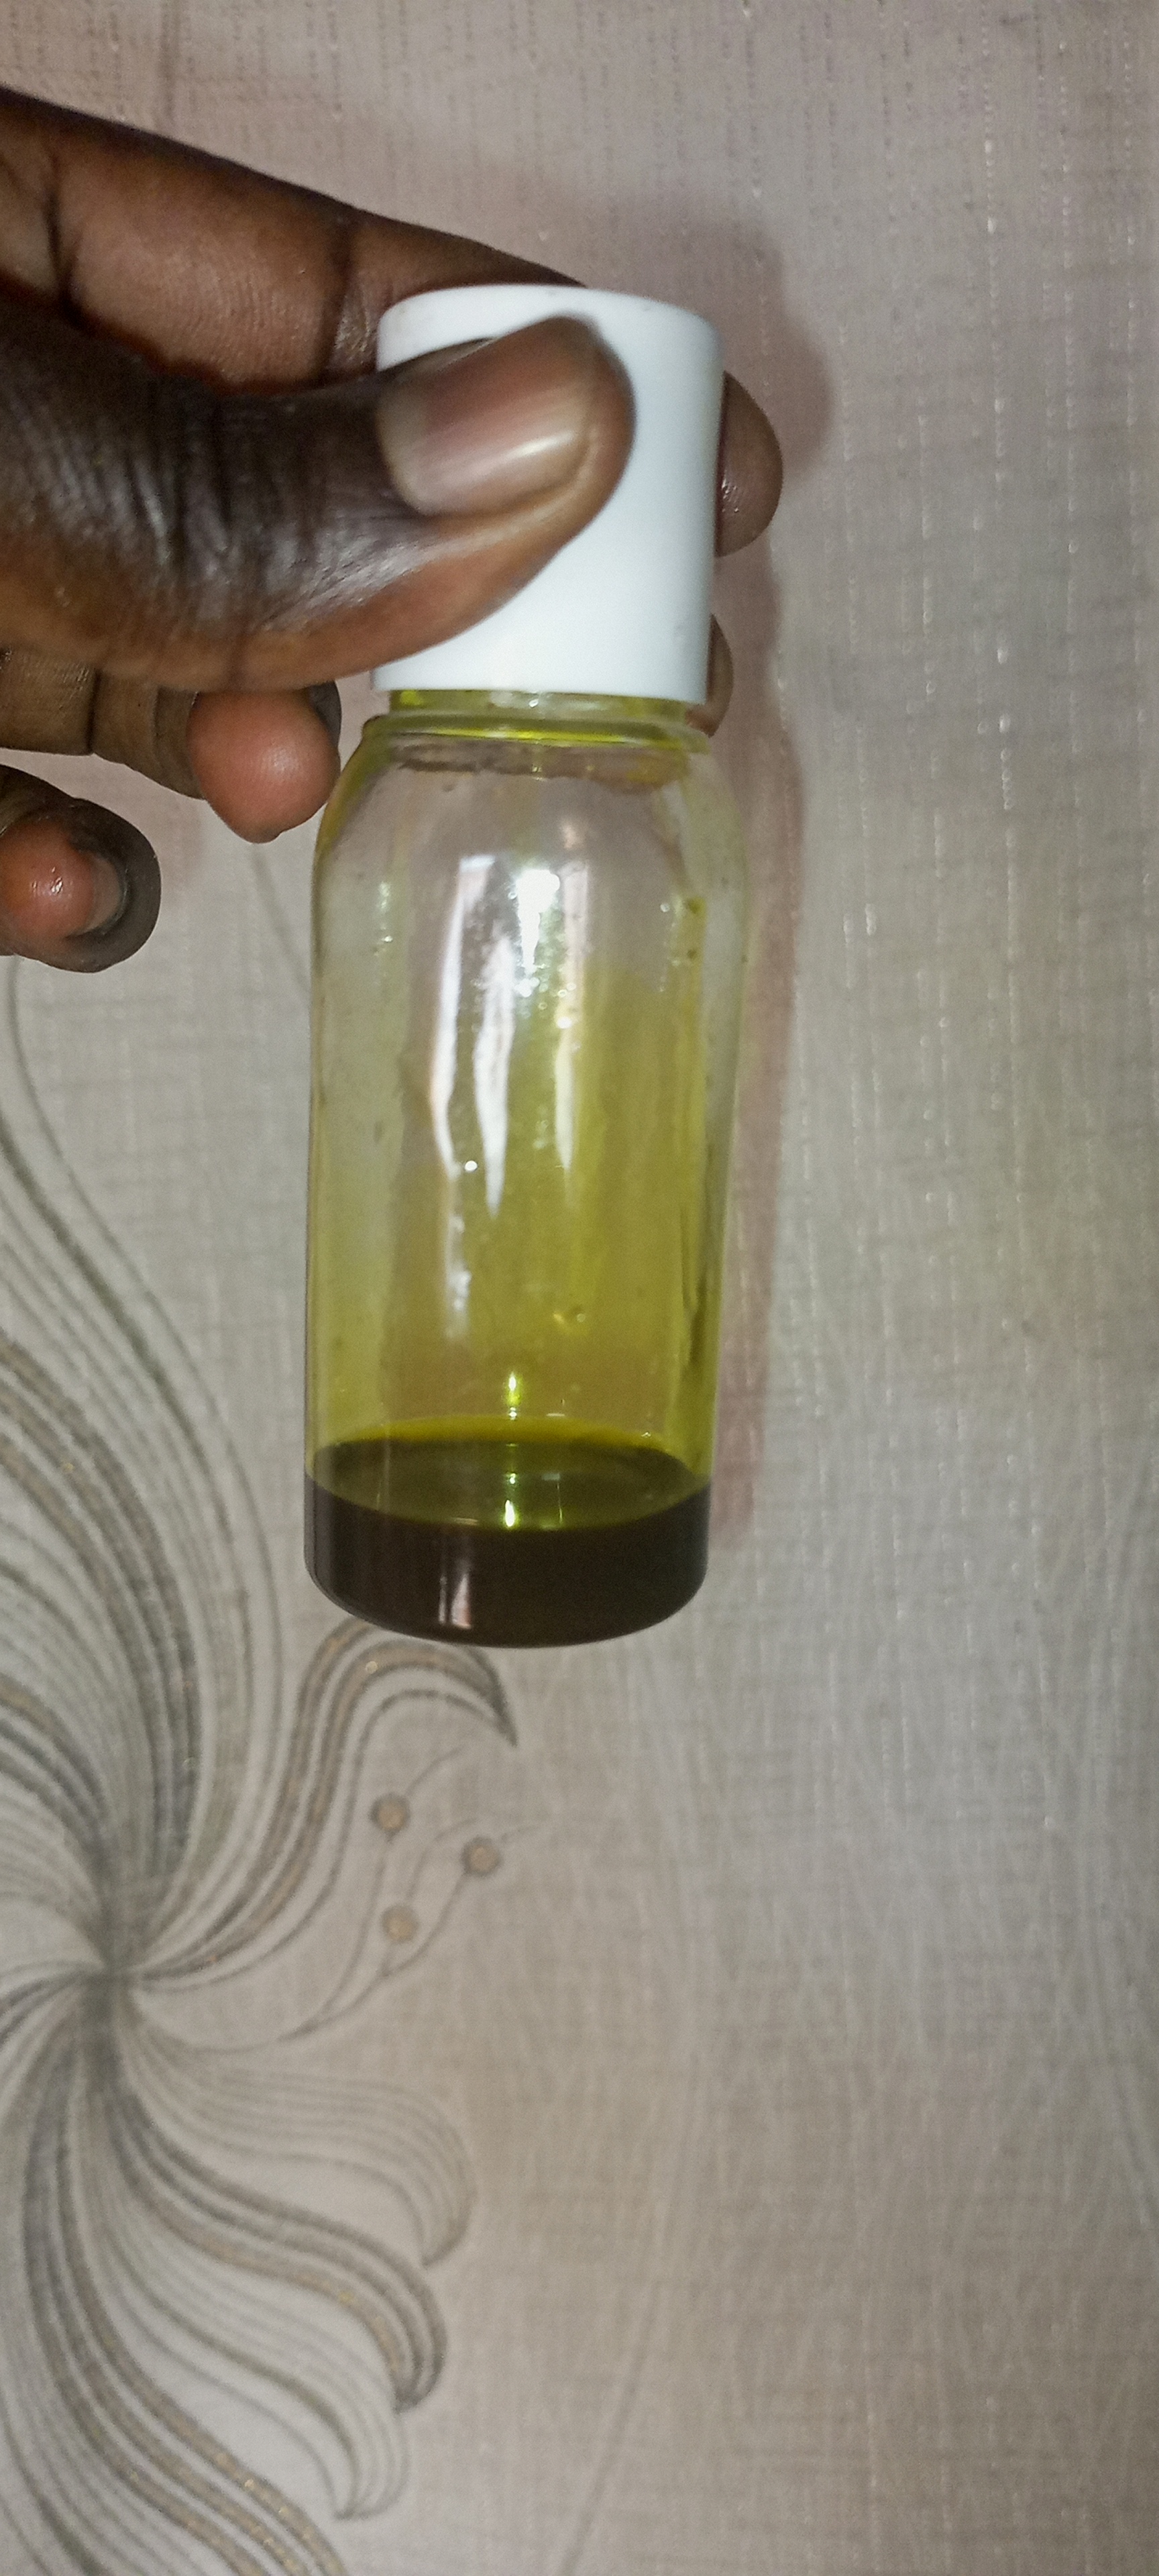 Picture : mine took it now showing the avocado oil obtained 